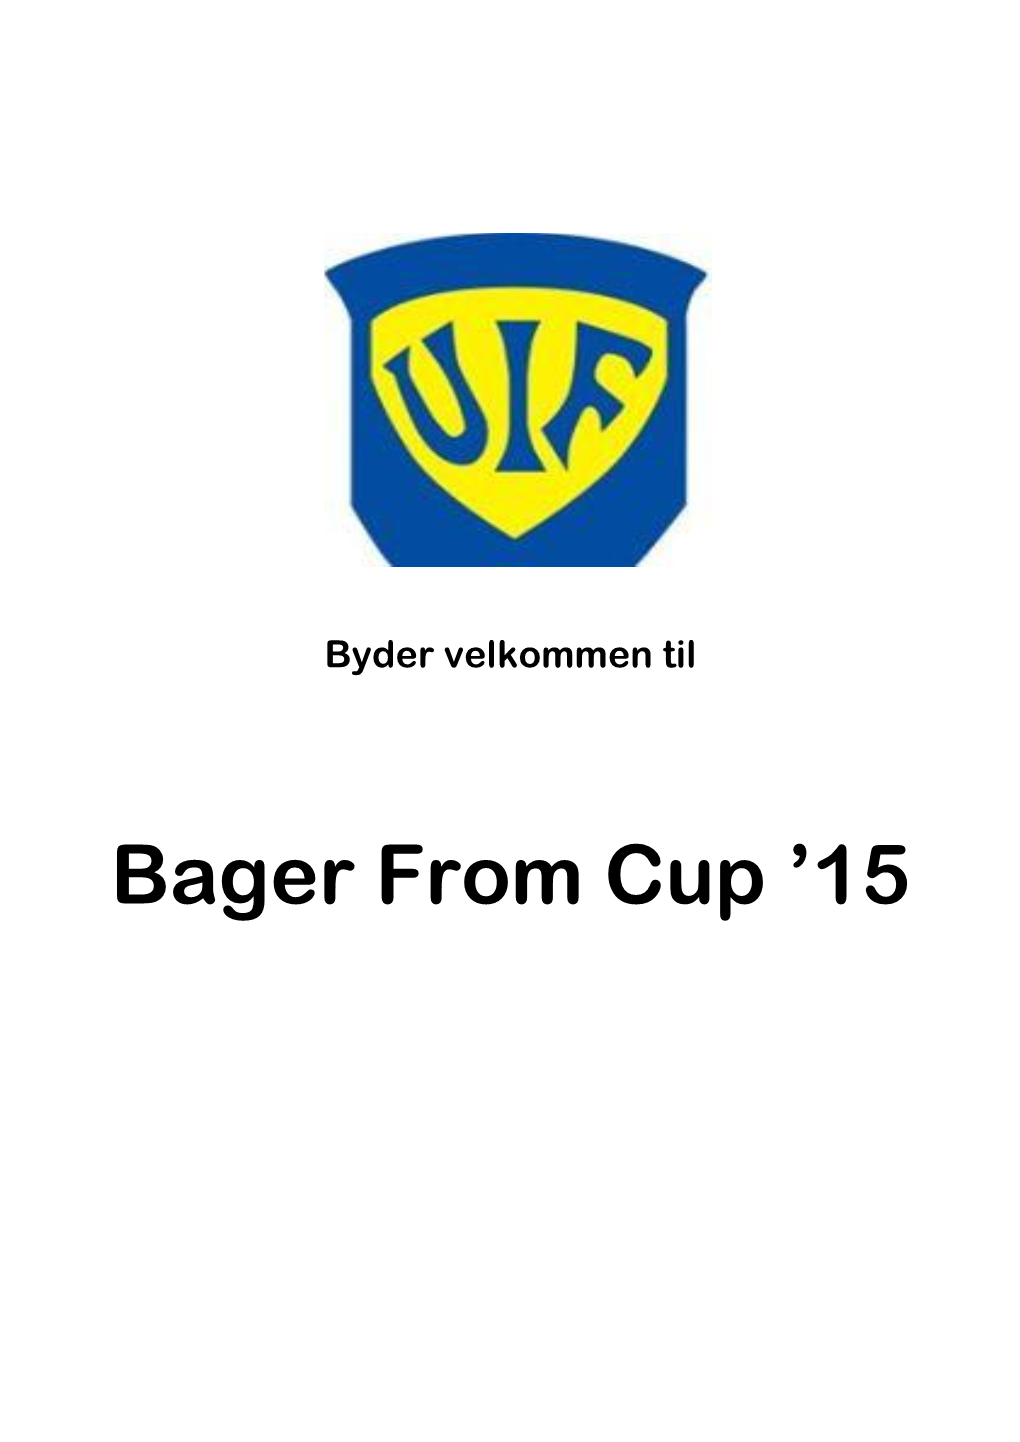 Bager from Cup ’15